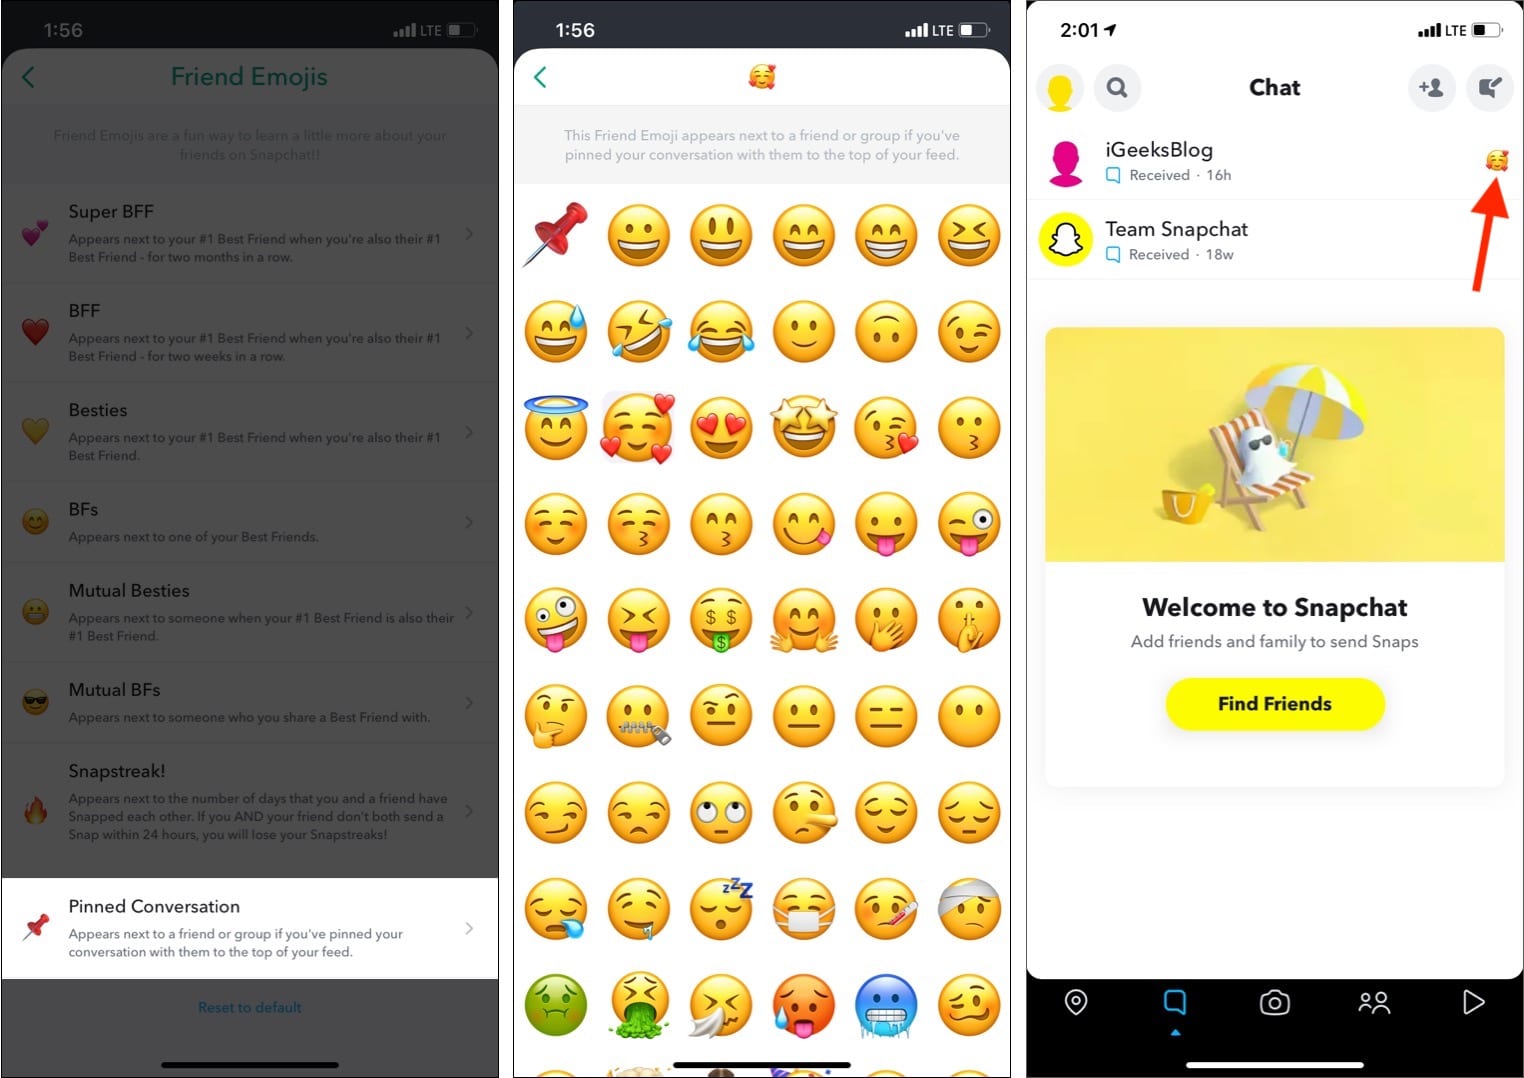 Tap Pinned Conversation choose any emoji to change pin emoji for pinned chats